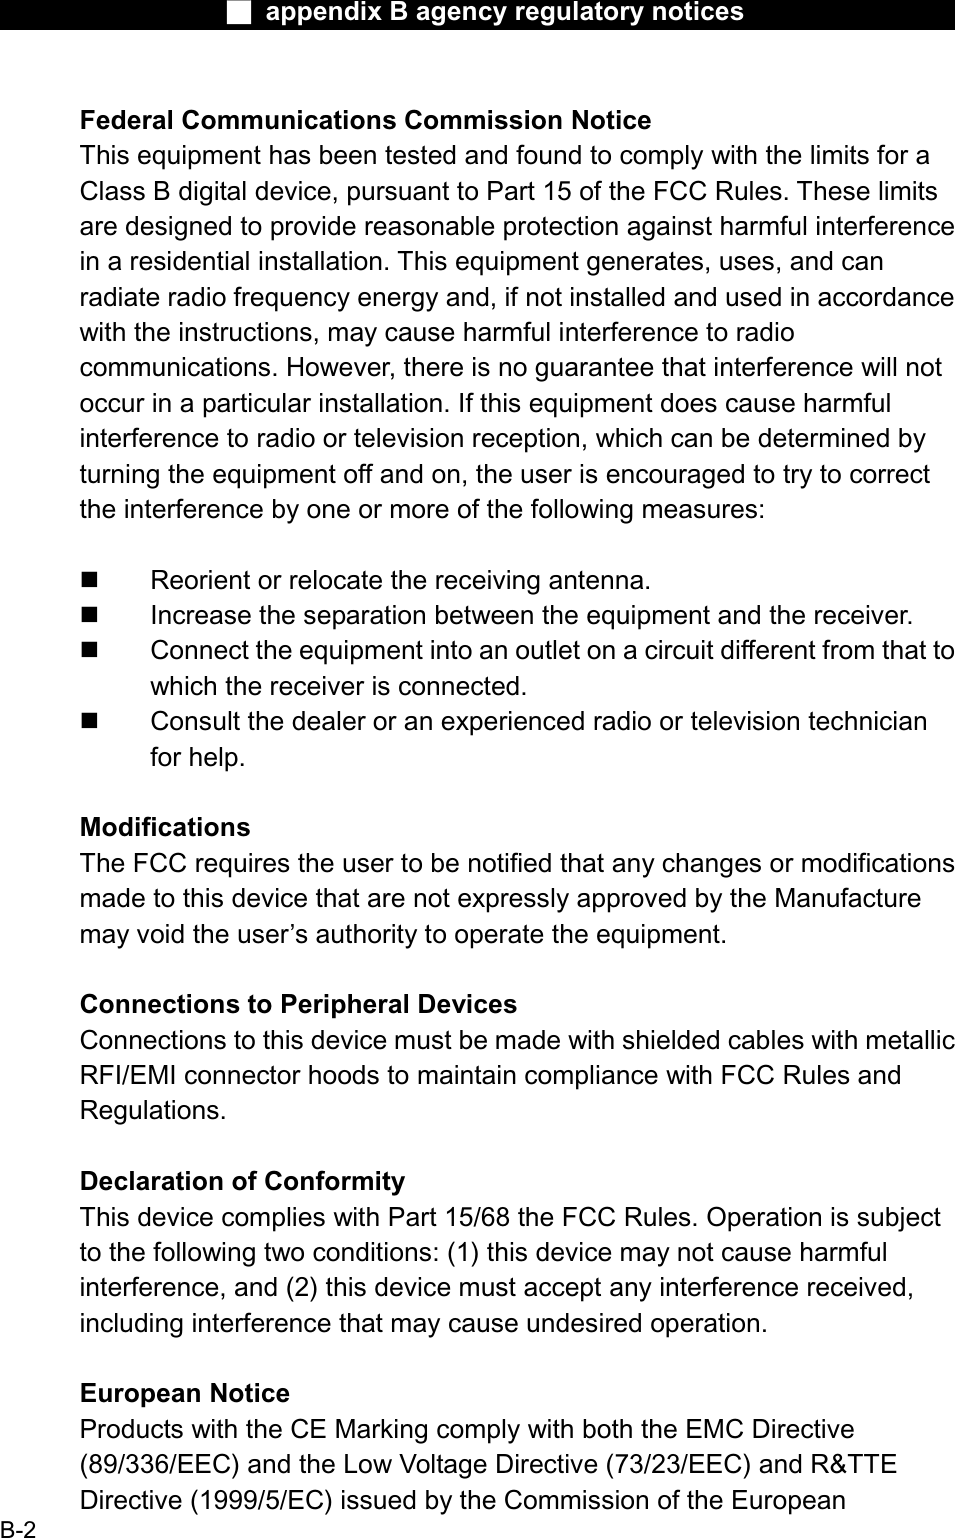 Ϯ appendix B agency regulatory noticesFederal Communications Commission NoticeThis equipment has been tested and found to comply with the limits for a Class B digital device, pursuant to Part 15 of the FCC Rules. These limitsare designed to provide reasonable protection against harmful interferencein a residential installation. This equipment generates, uses, and can radiate radio frequency energy and, if not installed and used in accordancewith the instructions, may cause harmful interference to radiocommunications. However, there is no guarantee that interference will not occur in a particular installation. If this equipment does cause harmful interference to radio or television reception, which can be determined byturning the equipment off and on, the user is encouraged to try to correct the interference by one or more of the following measures: Reorient or relocate the receiving antenna. Increase the separation between the equipment and the receiver. Connect the equipment into an outlet on a circuit different from that to which the receiver is connected. Consult the dealer or an experienced radio or television technicianfor help. ModificationsThe FCC requires the user to be notified that any changes or modificationsmade to this device that are not expressly approved by the Manufacture may void the user’s authority to operate the equipment.Connections to Peripheral DevicesConnections to this device must be made with shielded cables with metallicRFI/EMI connector hoods to maintain compliance with FCC Rules andRegulations.Declaration of ConformityThis device complies with Part 15/68 the FCC Rules. Operation is subjectto the following two conditions: (1) this device may not cause harmful interference, and (2) this device must accept any interference received,including interference that may cause undesired operation.European NoticeProducts with the CE Marking comply with both the EMC Directive(89/336/EEC) and the Low Voltage Directive (73/23/EEC) and R&amp;TTEDirective (1999/5/EC) issued by the Commission of the EuropeanB-2